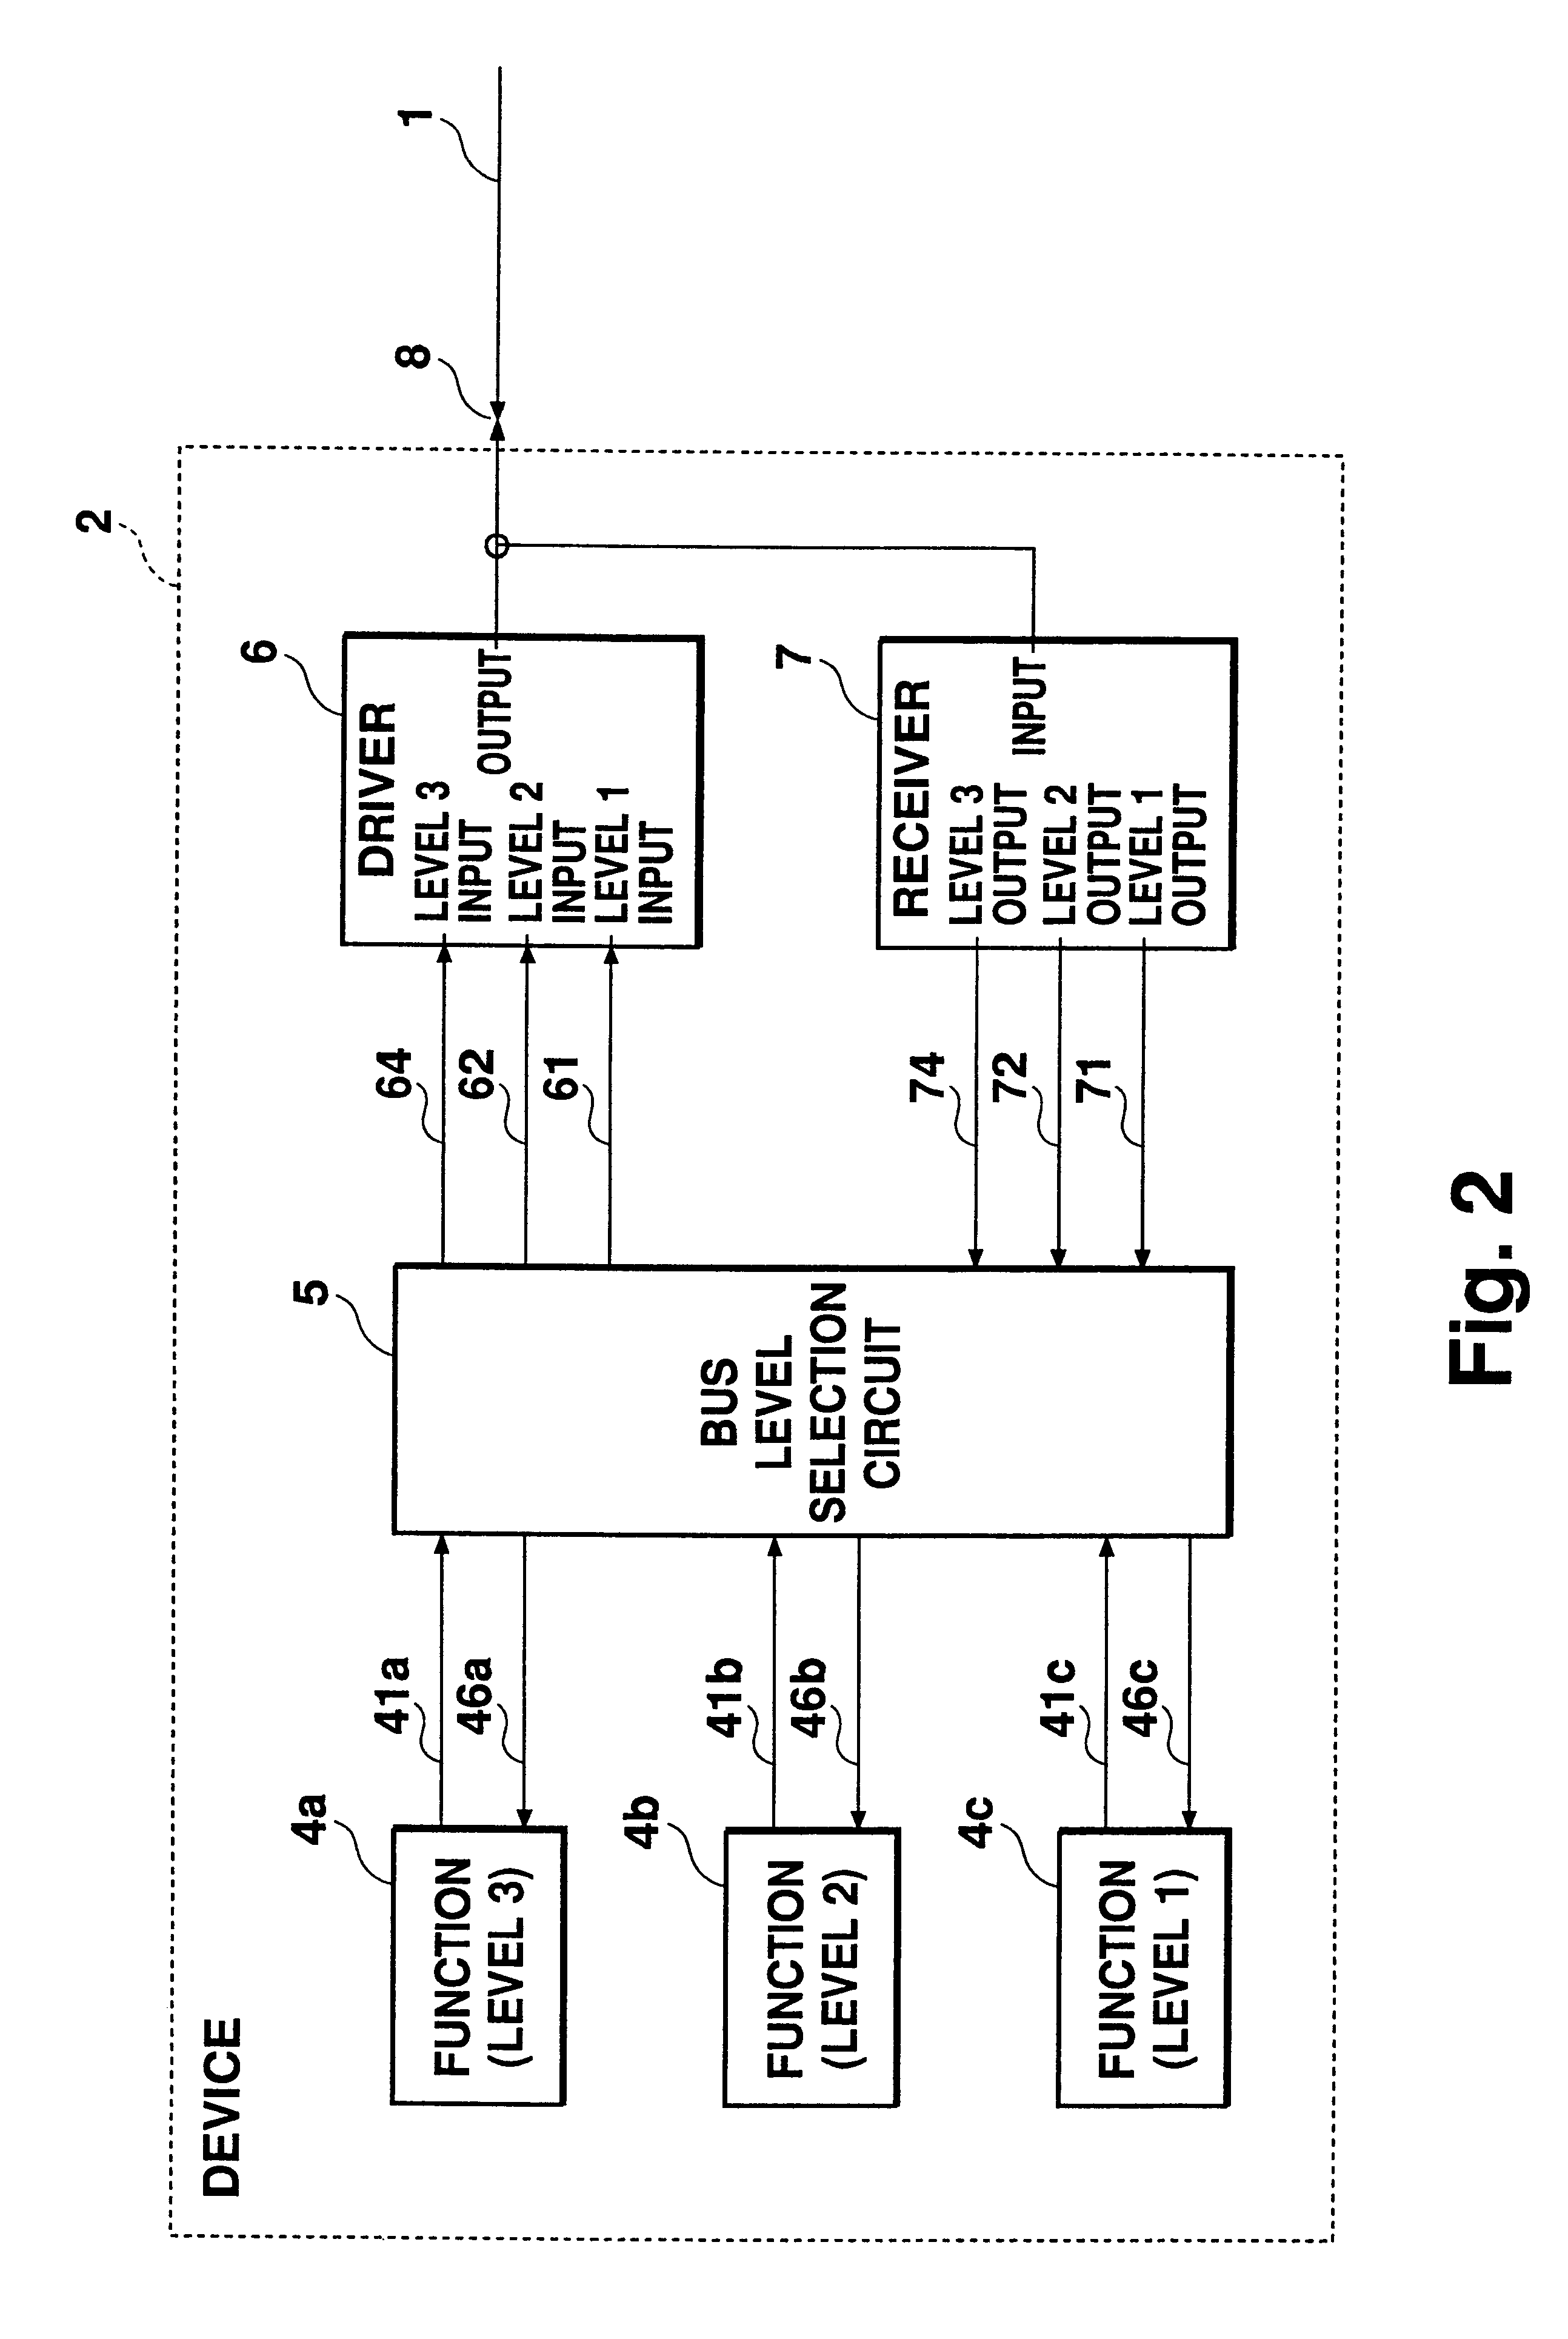 Multi-value logic device, bus system of multi-value logic devices connected with shared bus, and network system of information processors loaded with multi-value logic devices and connected with shared network